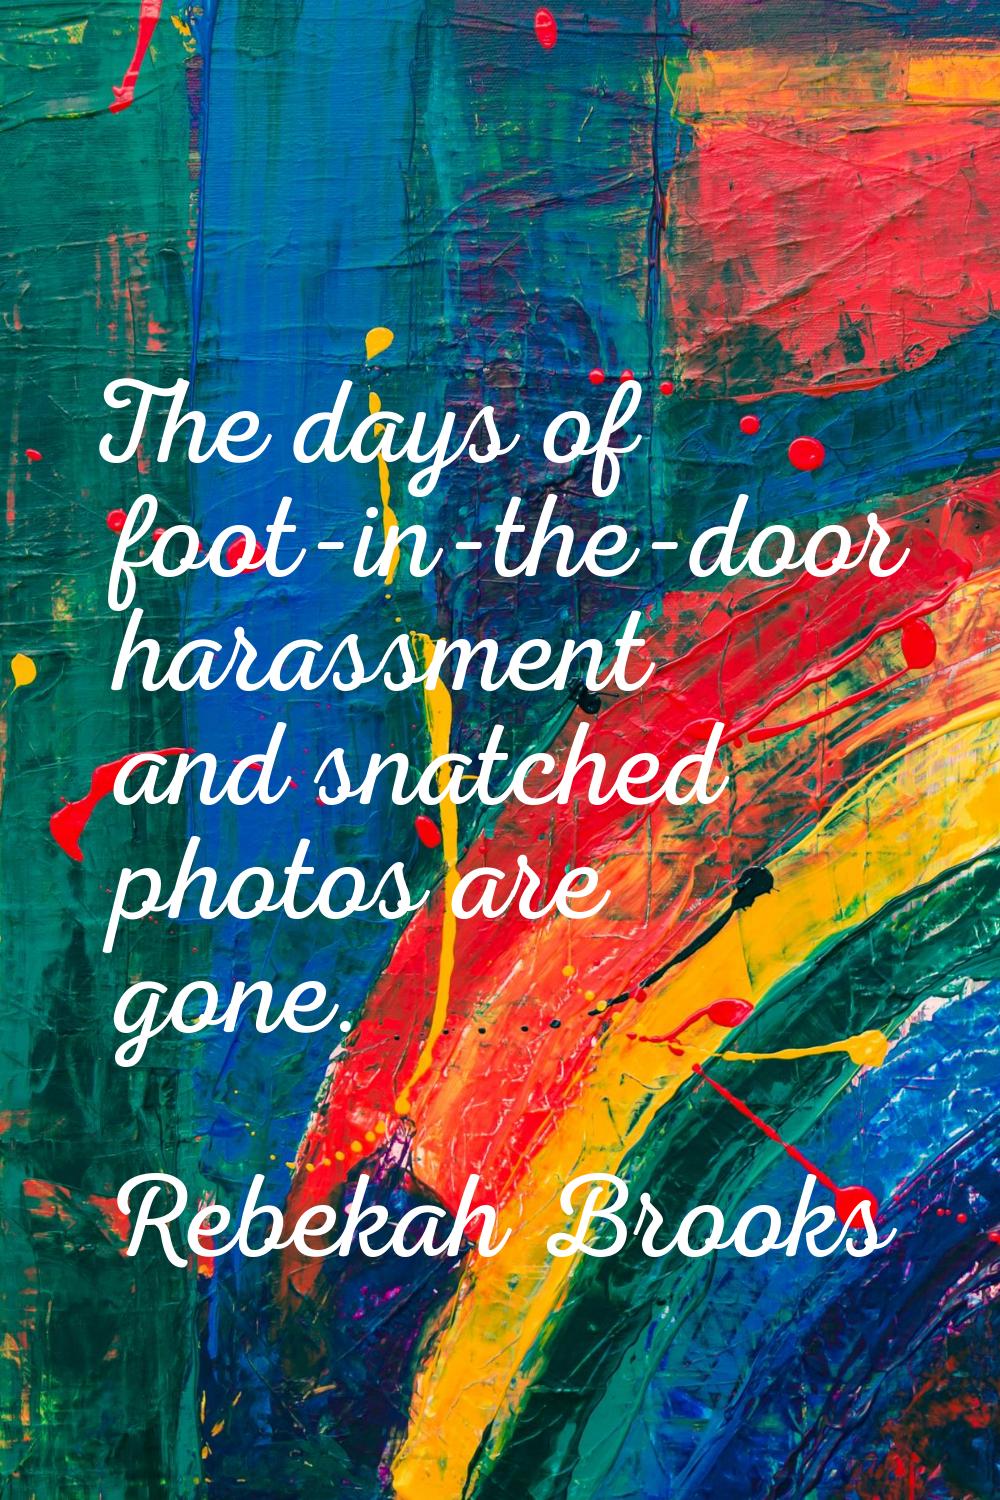 The days of foot-in-the-door harassment and snatched photos are gone.